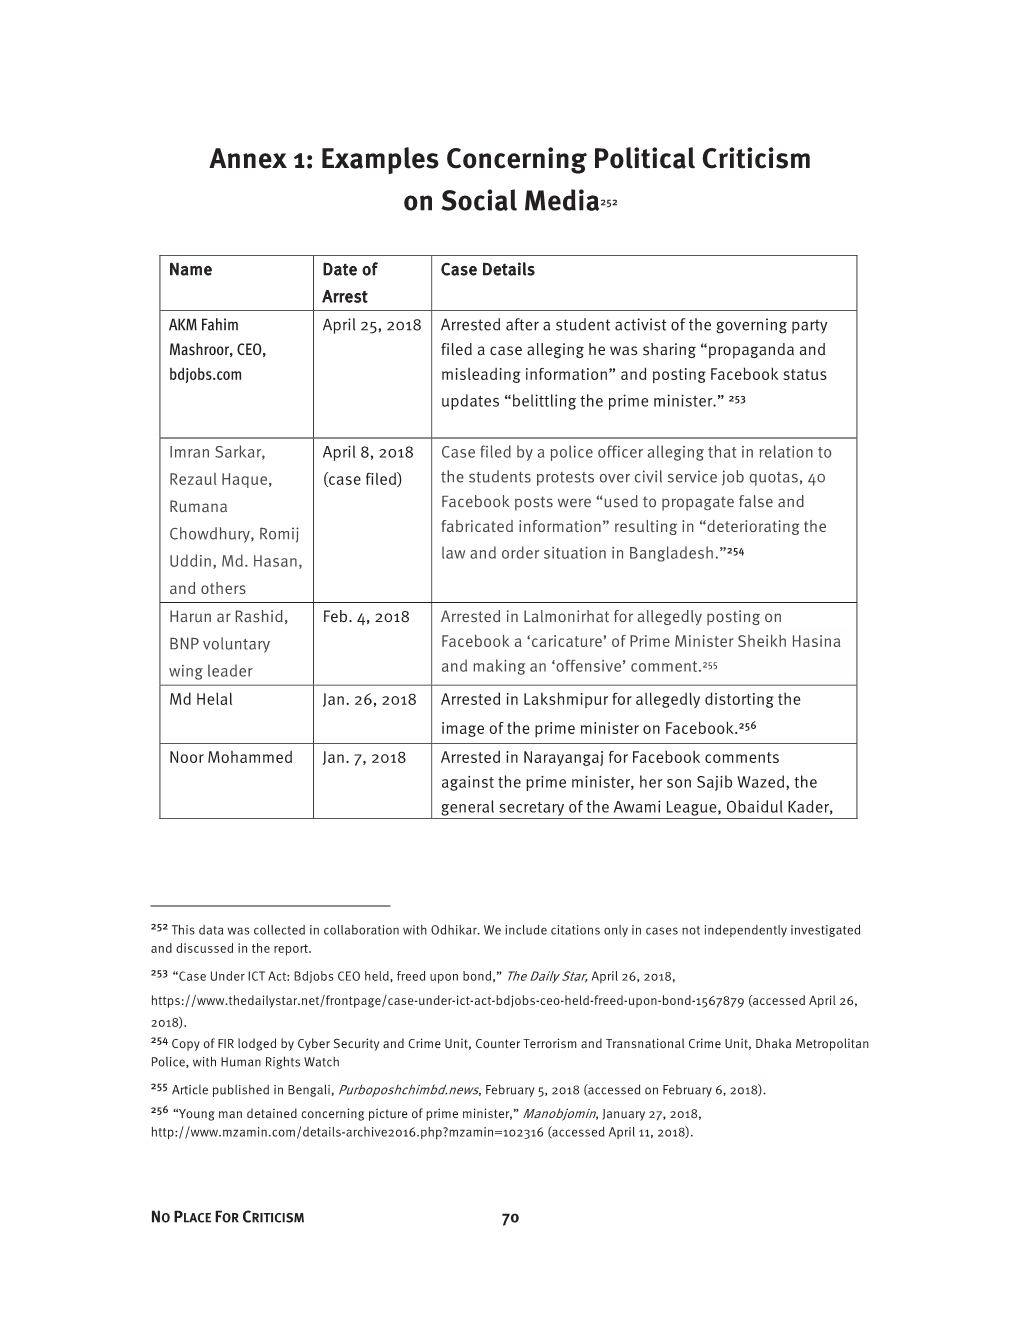 Annex 1: Examples Concerning Political Criticism on Social Media252